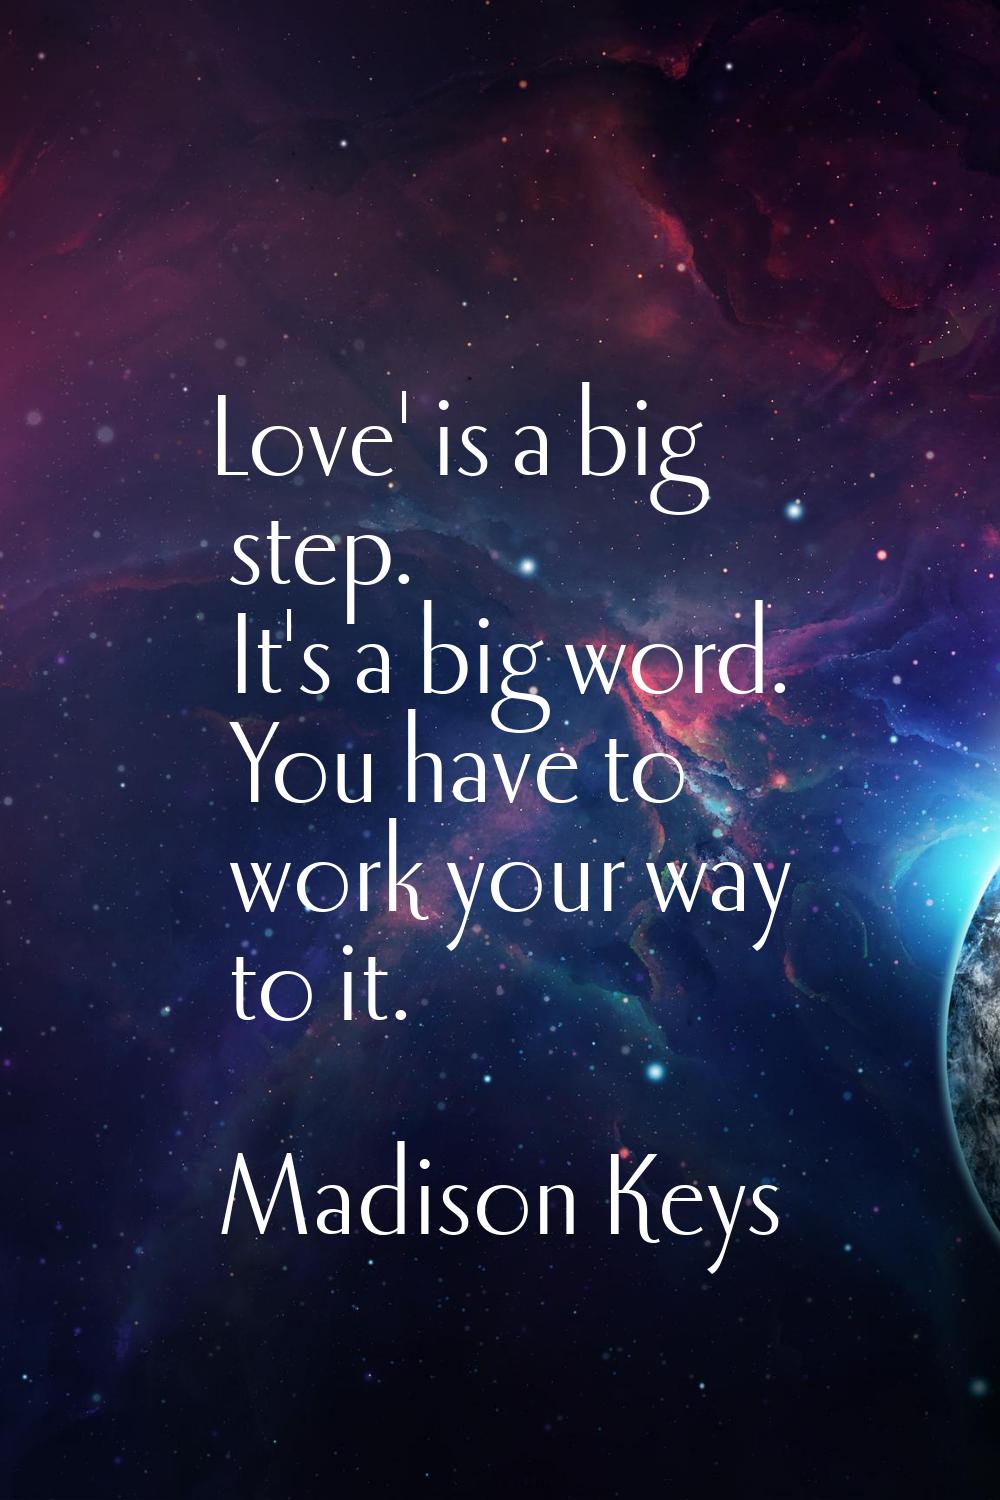 Love' is a big step. It's a big word. You have to work your way to it.